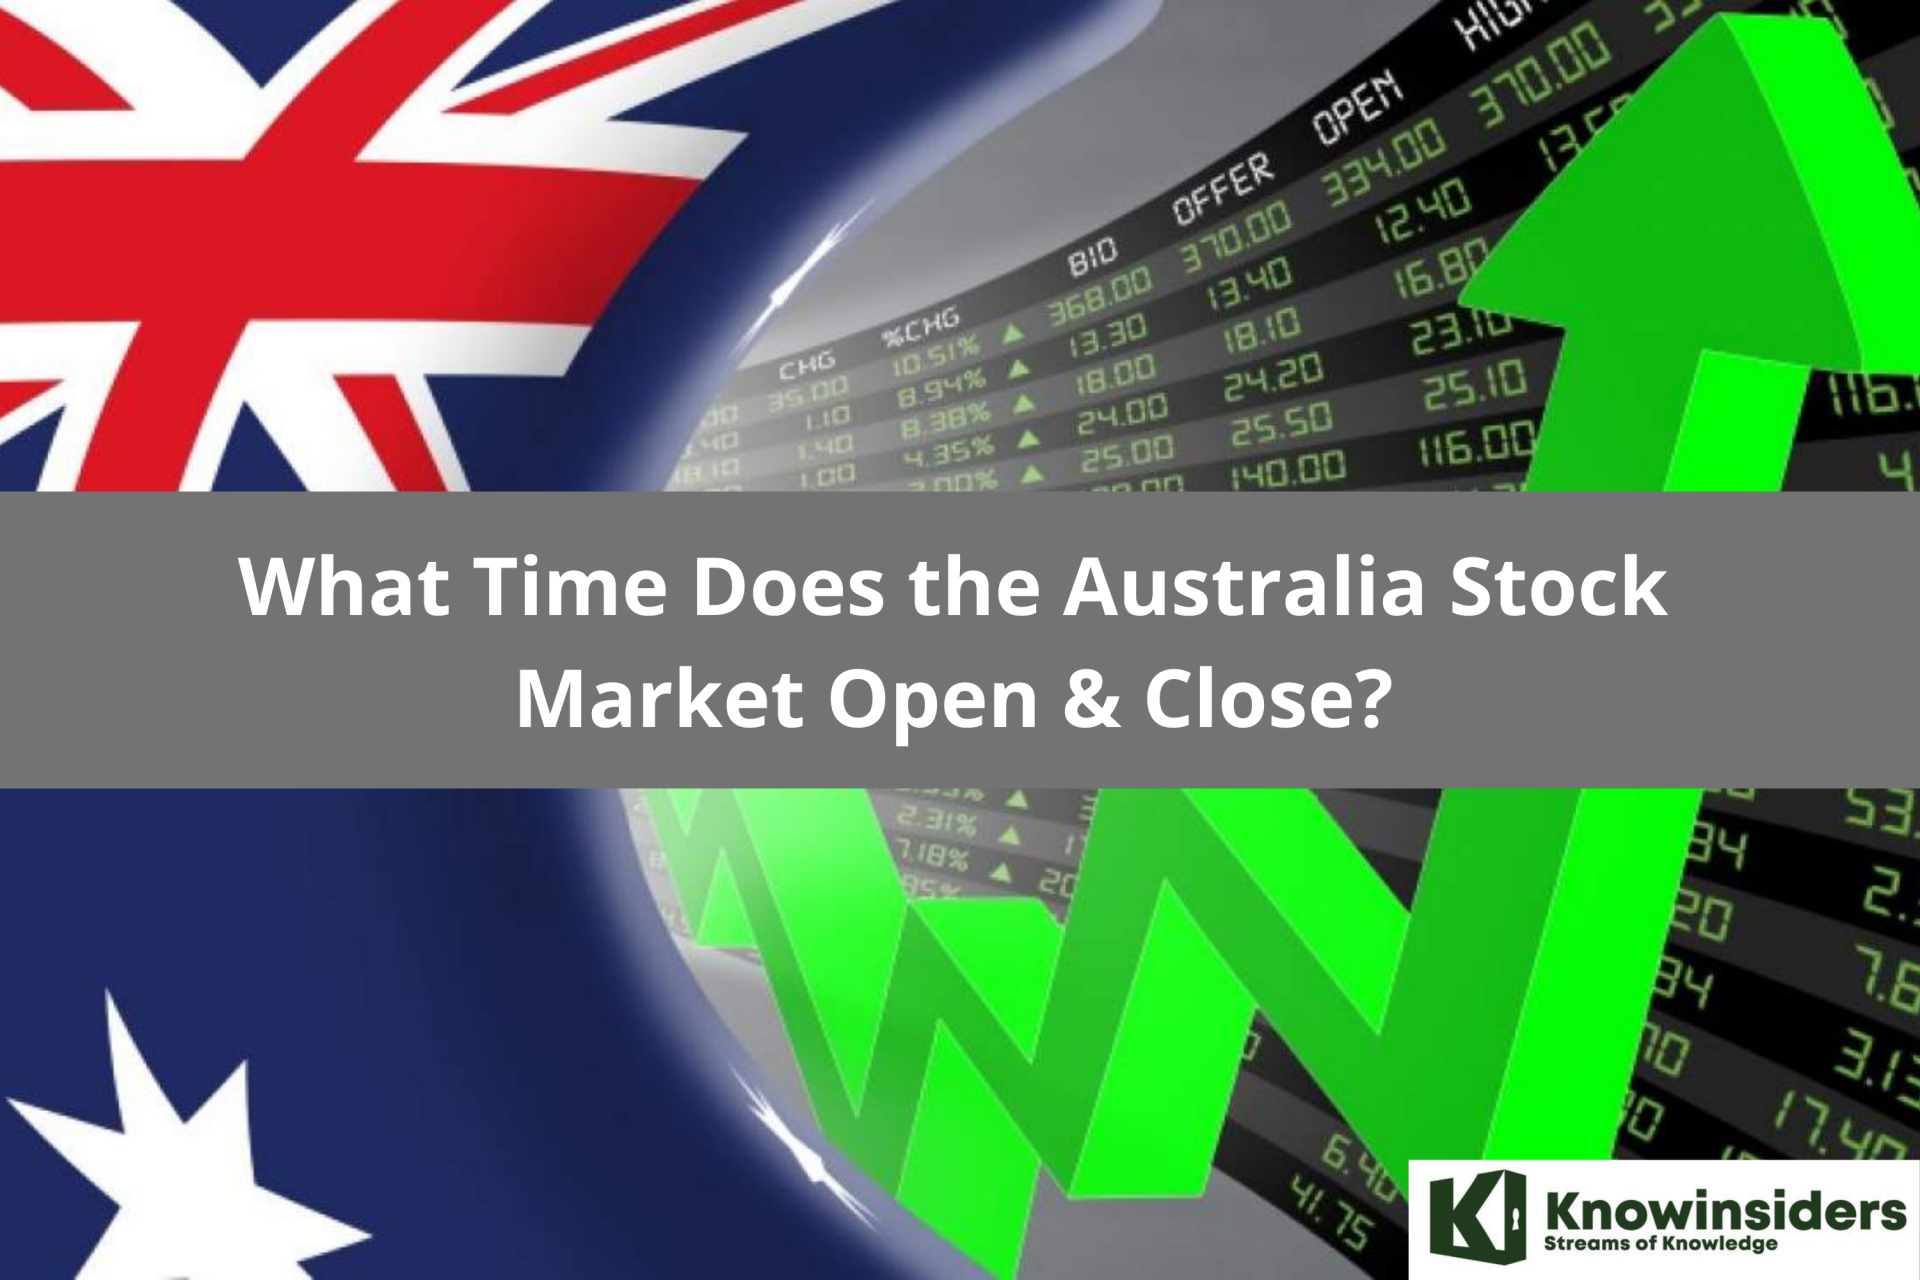 Photo: What Time Does the Australia Stock Market Open & Close?